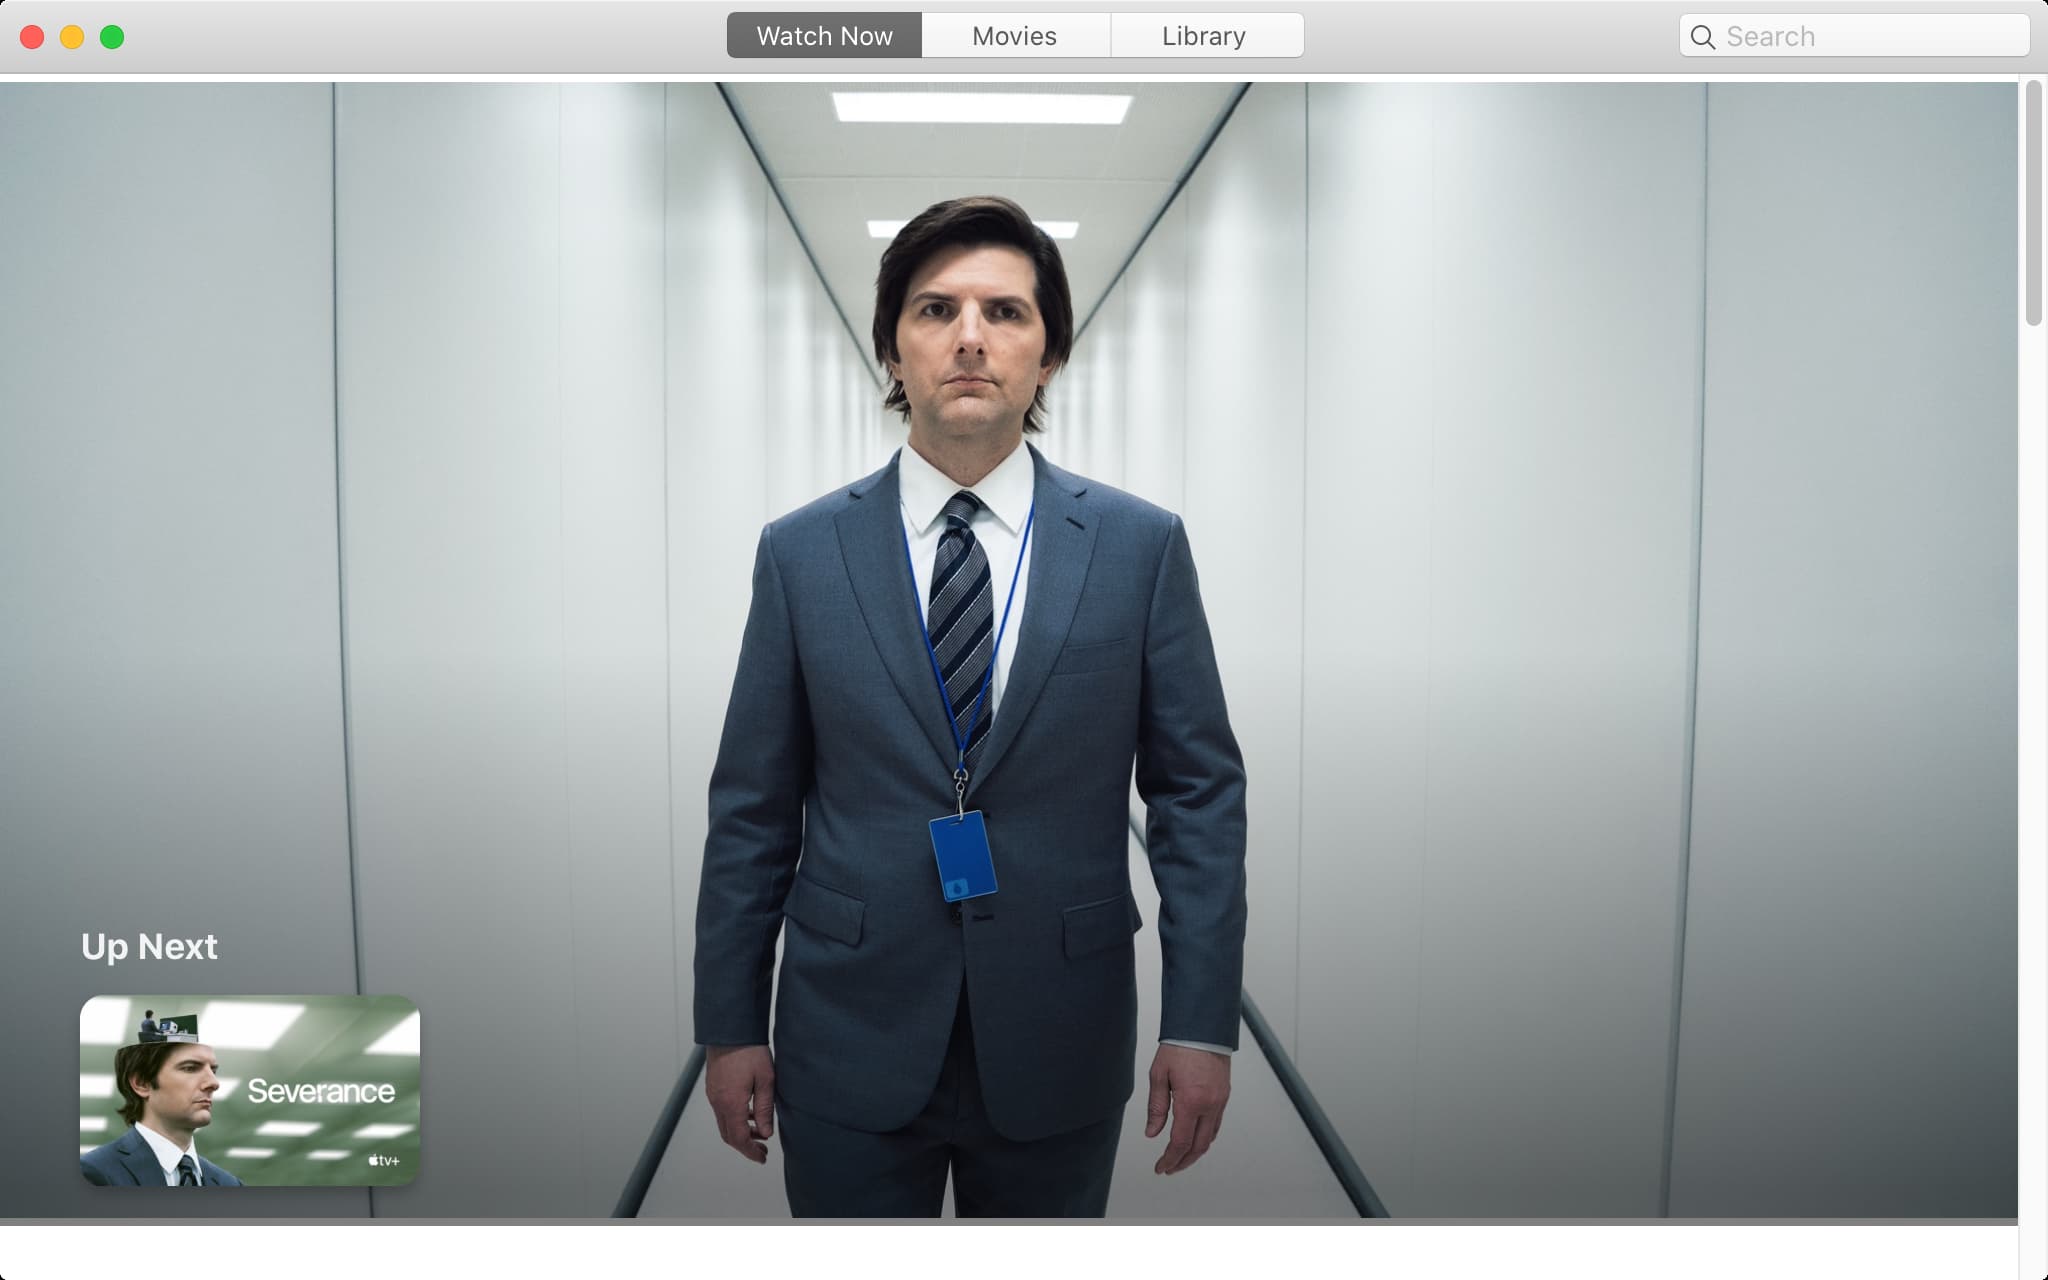 Screenshot from the TV show 'Severance'. Courtesy of Apple TV+